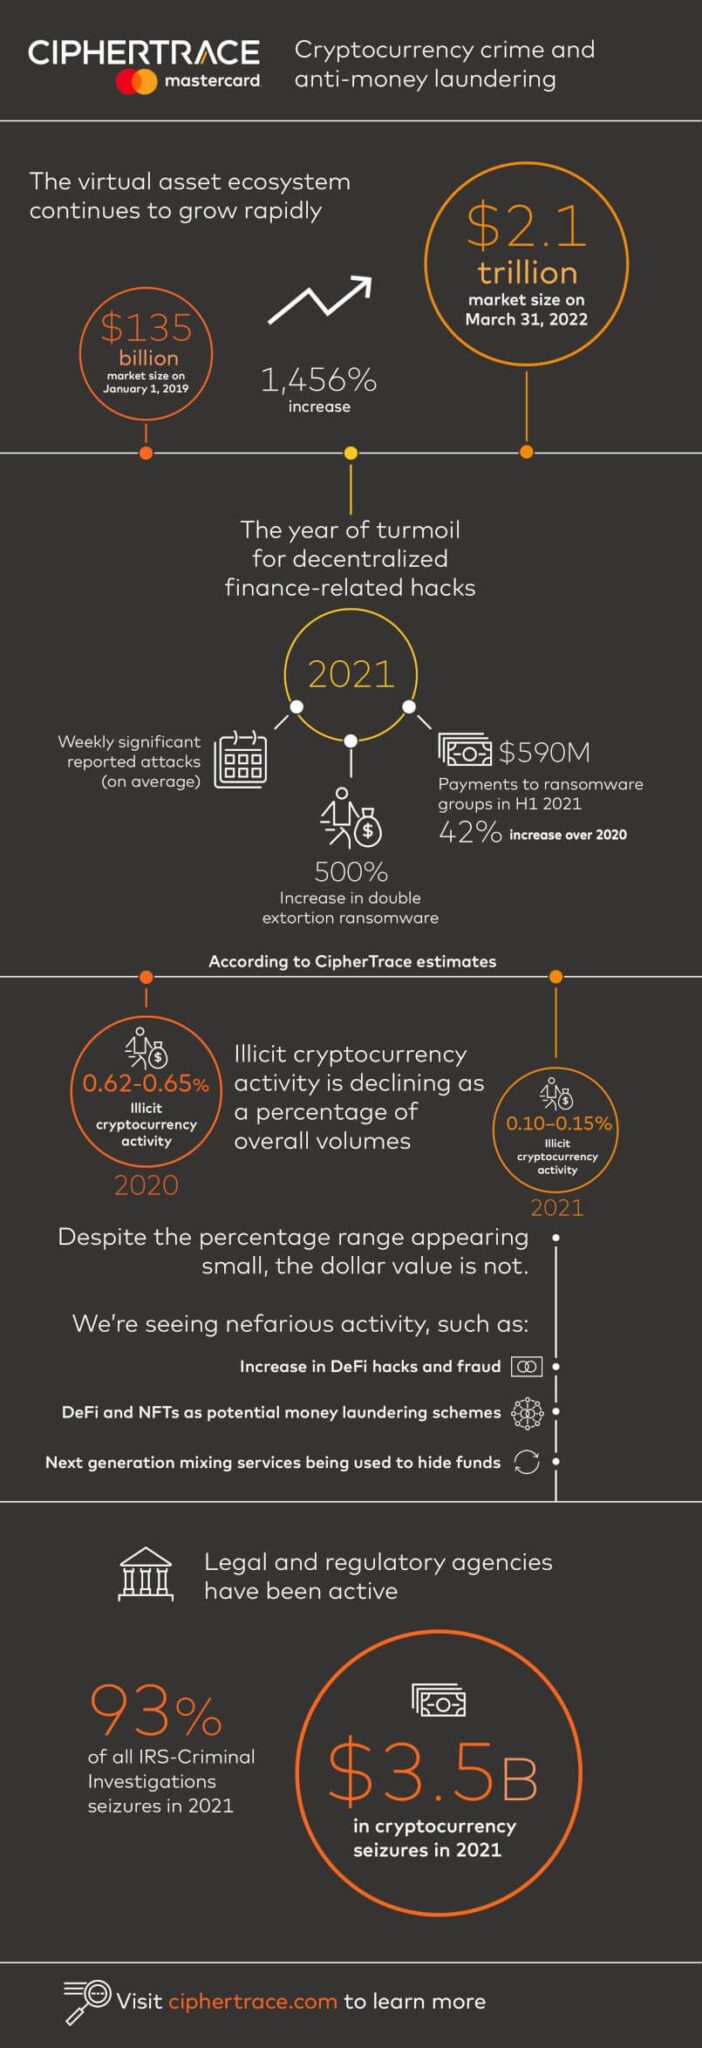 CipherTrace crypto crime and AML infographic